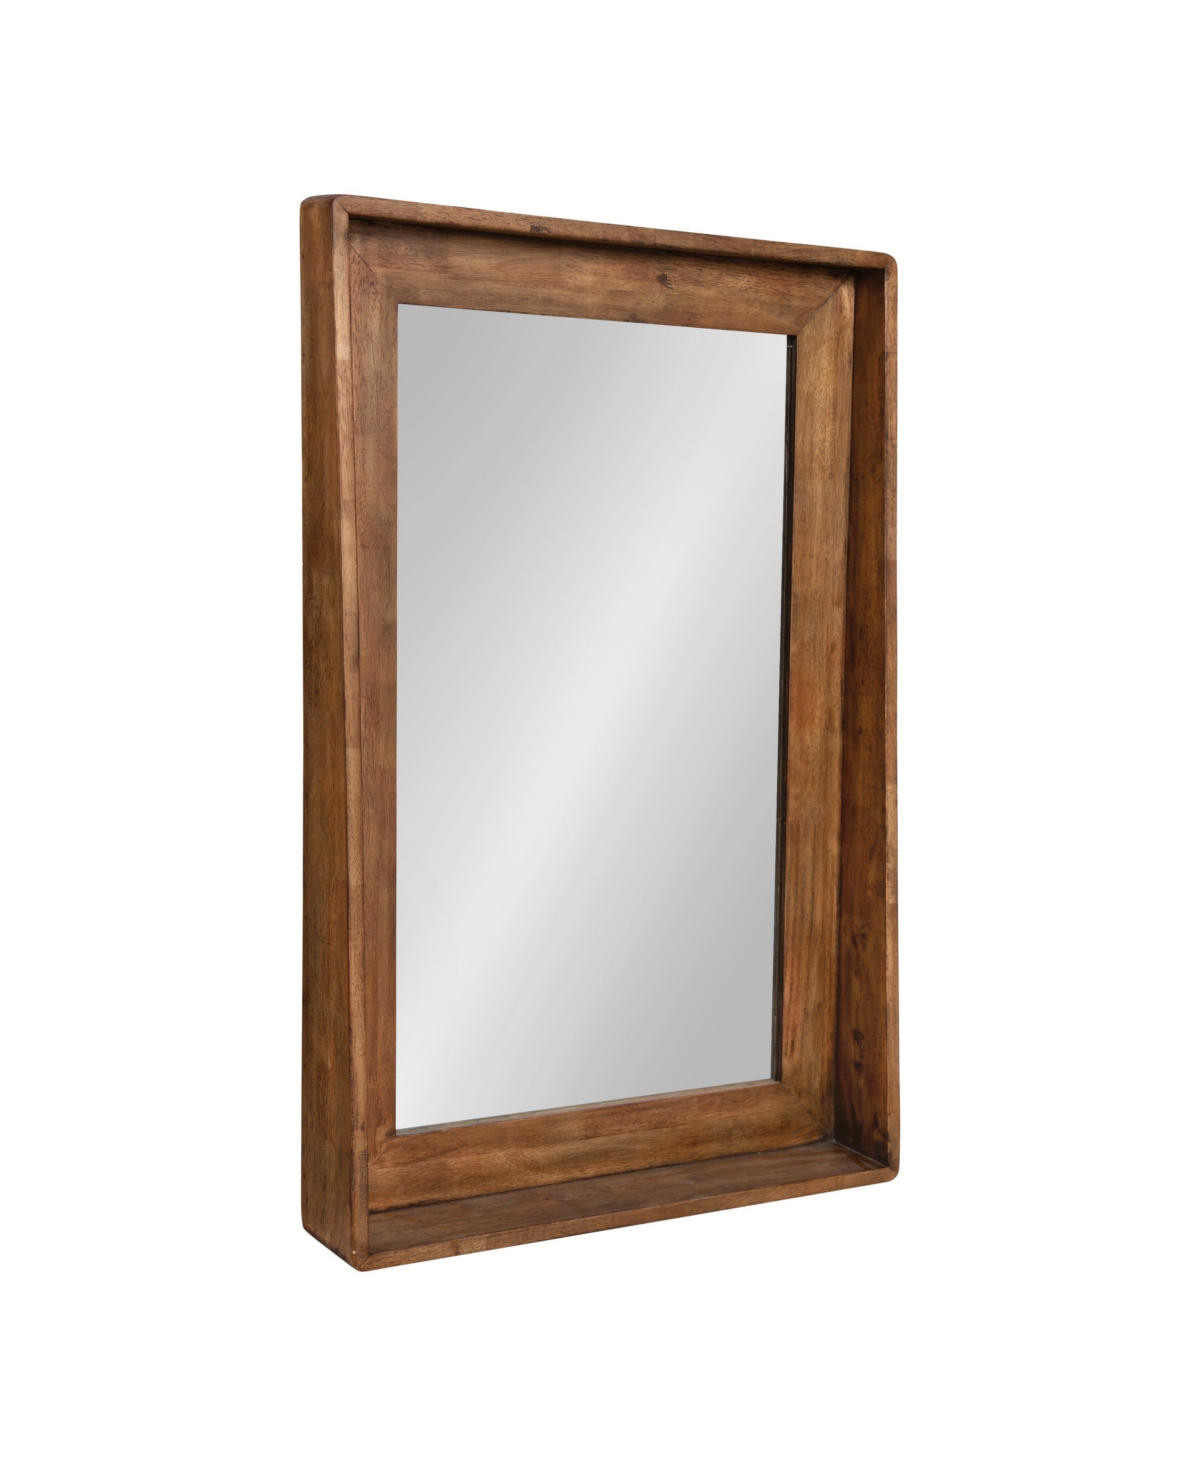 Basking Wall Mirror with Shelf - Brown